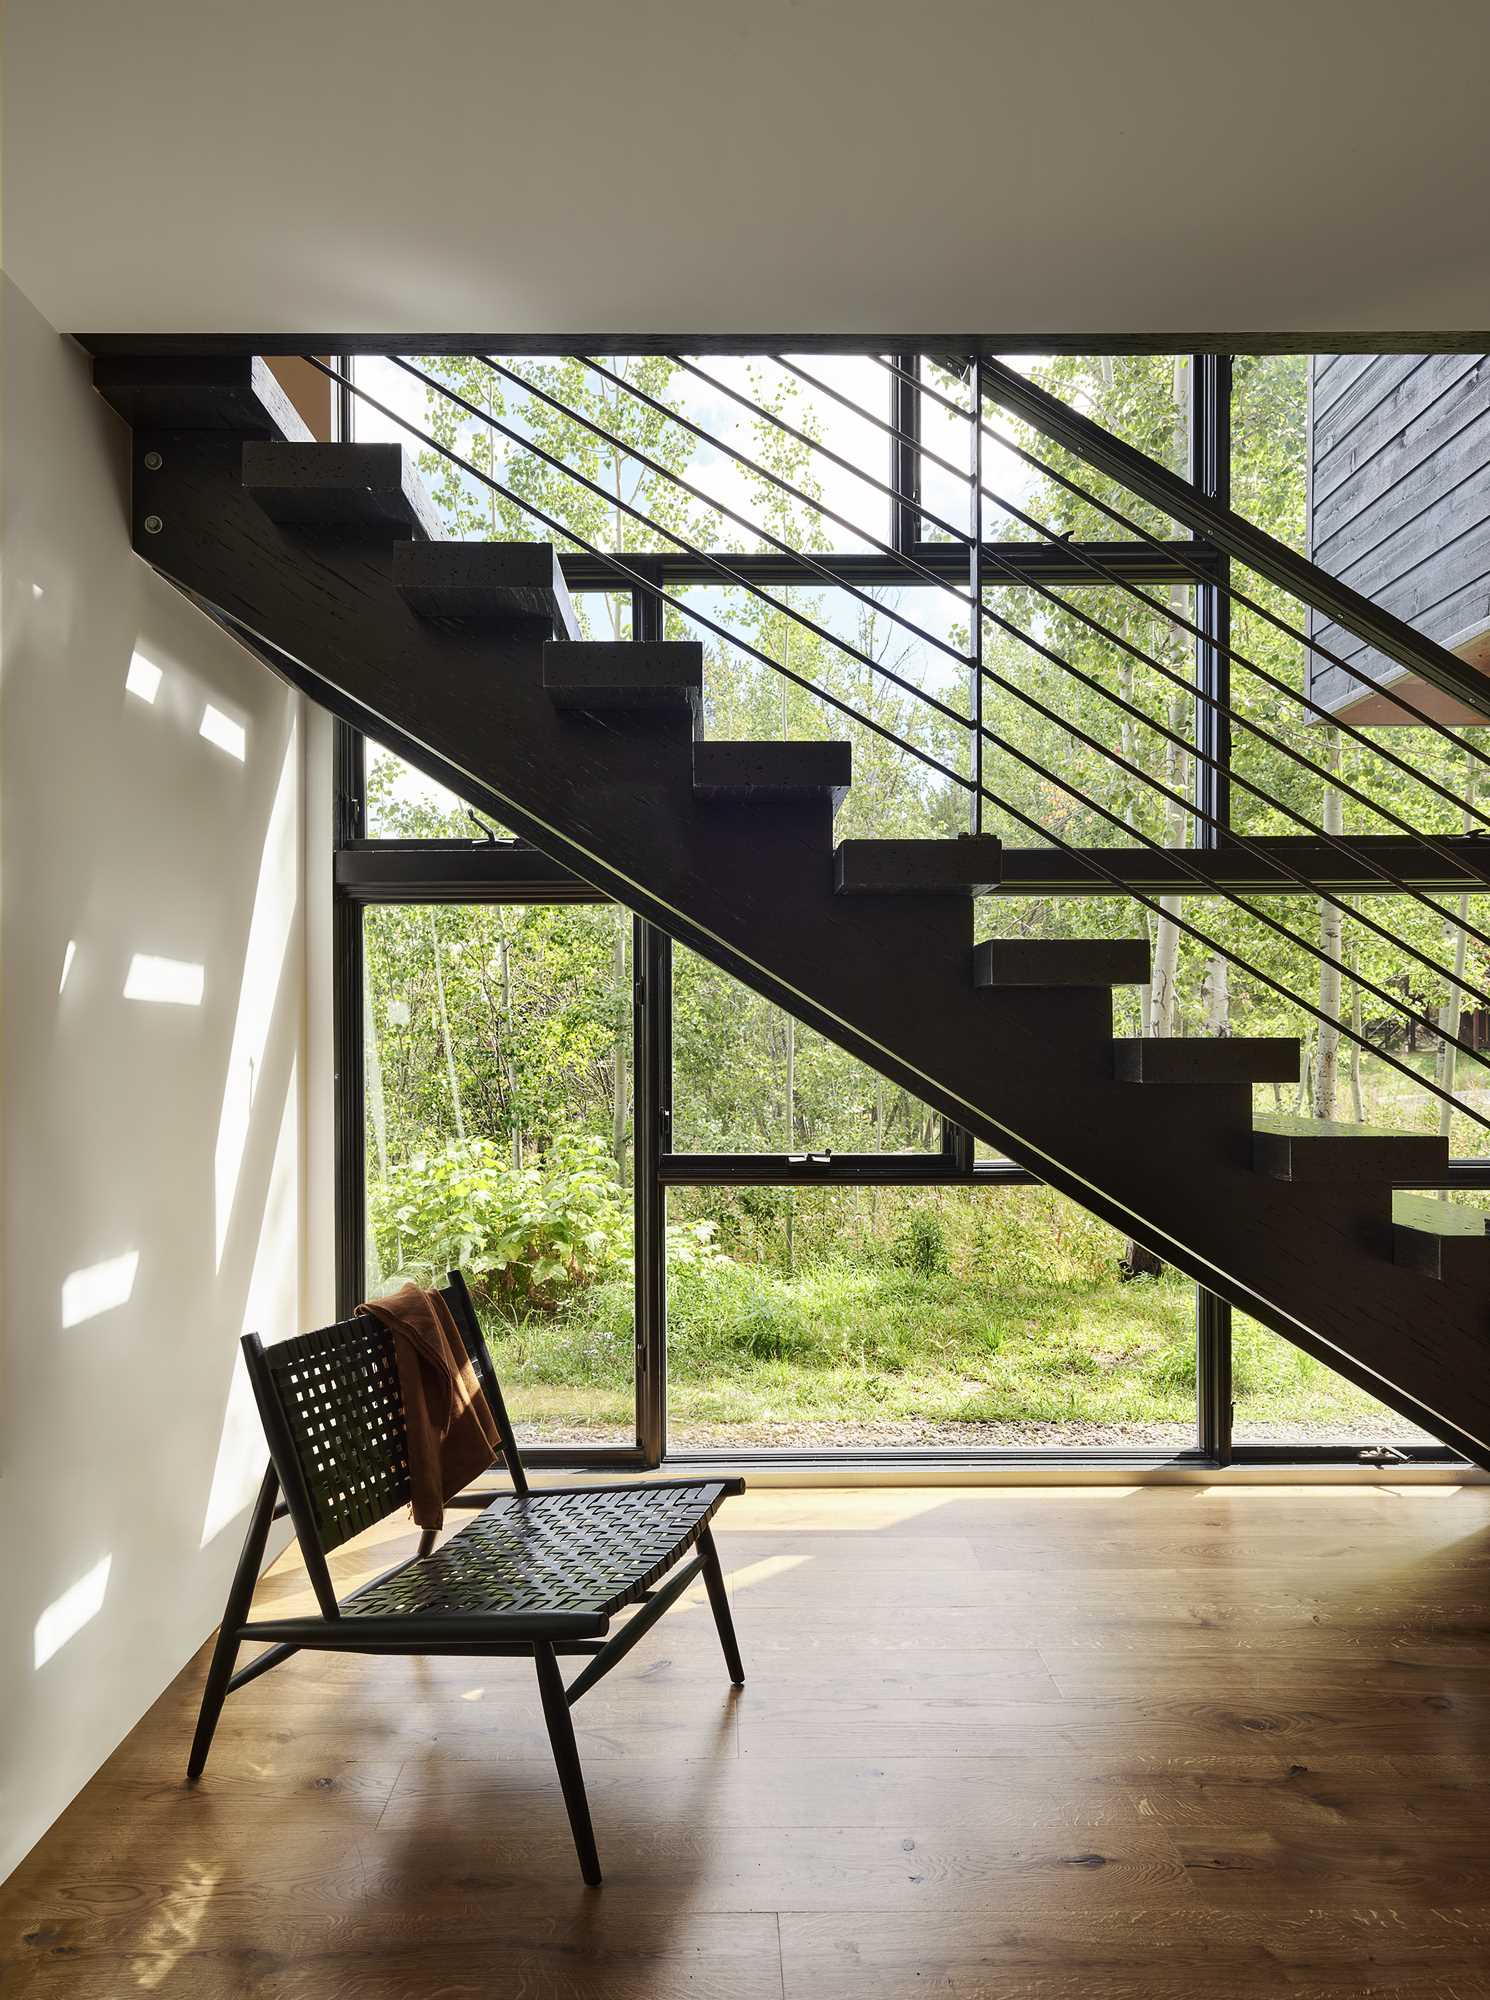 Stairs by the two-story window lead from the upper level of the home down to the guest room.